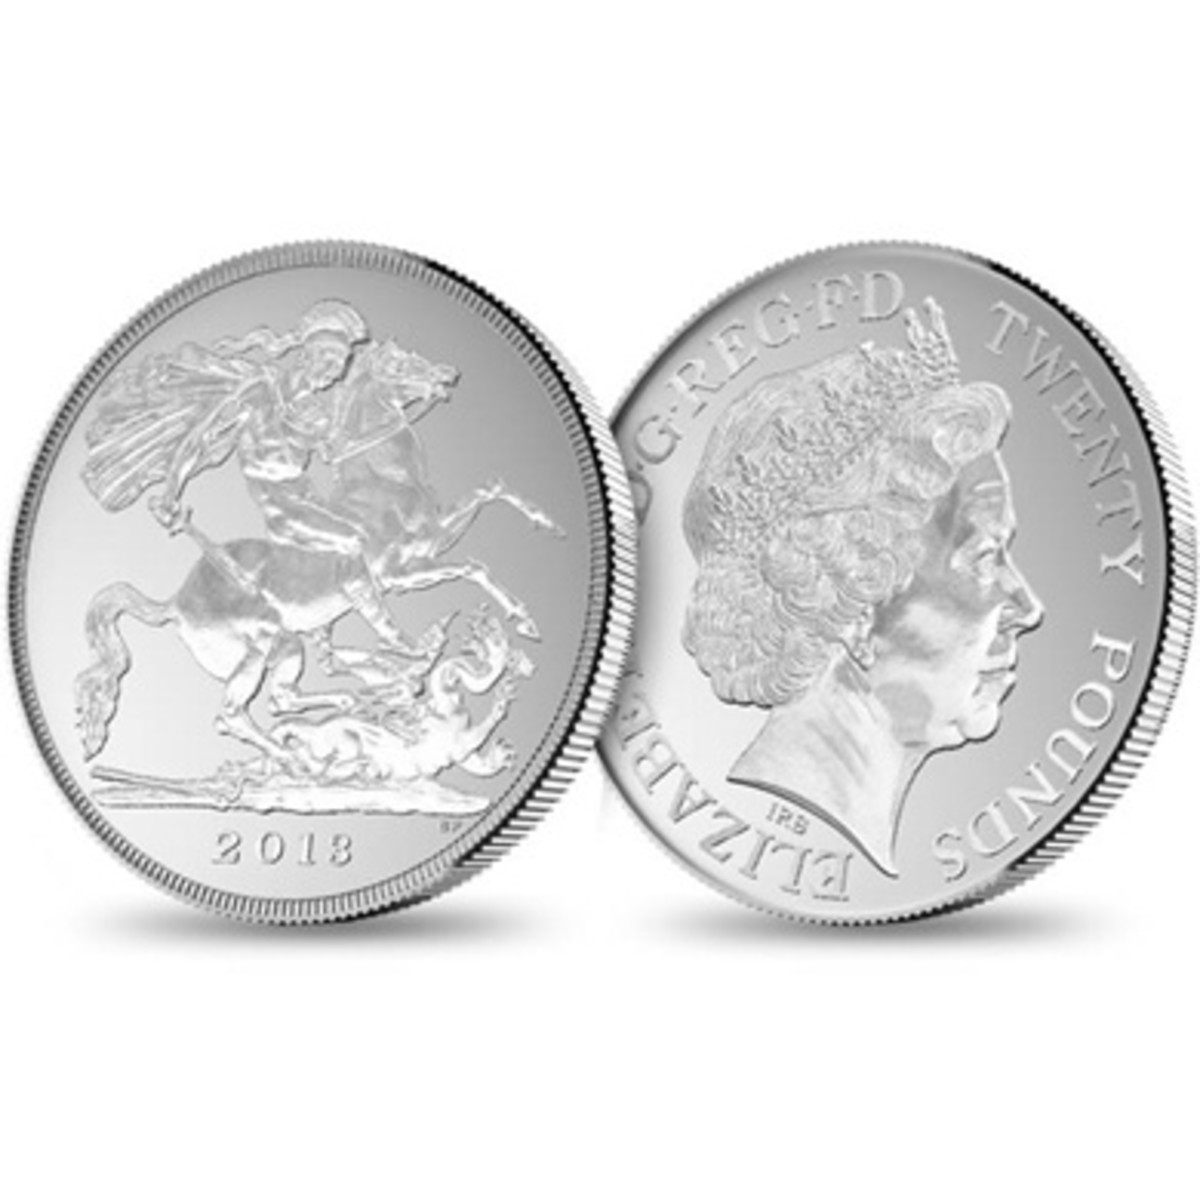 Where do you take an undated 20 pence piece to determine its monetary worth?